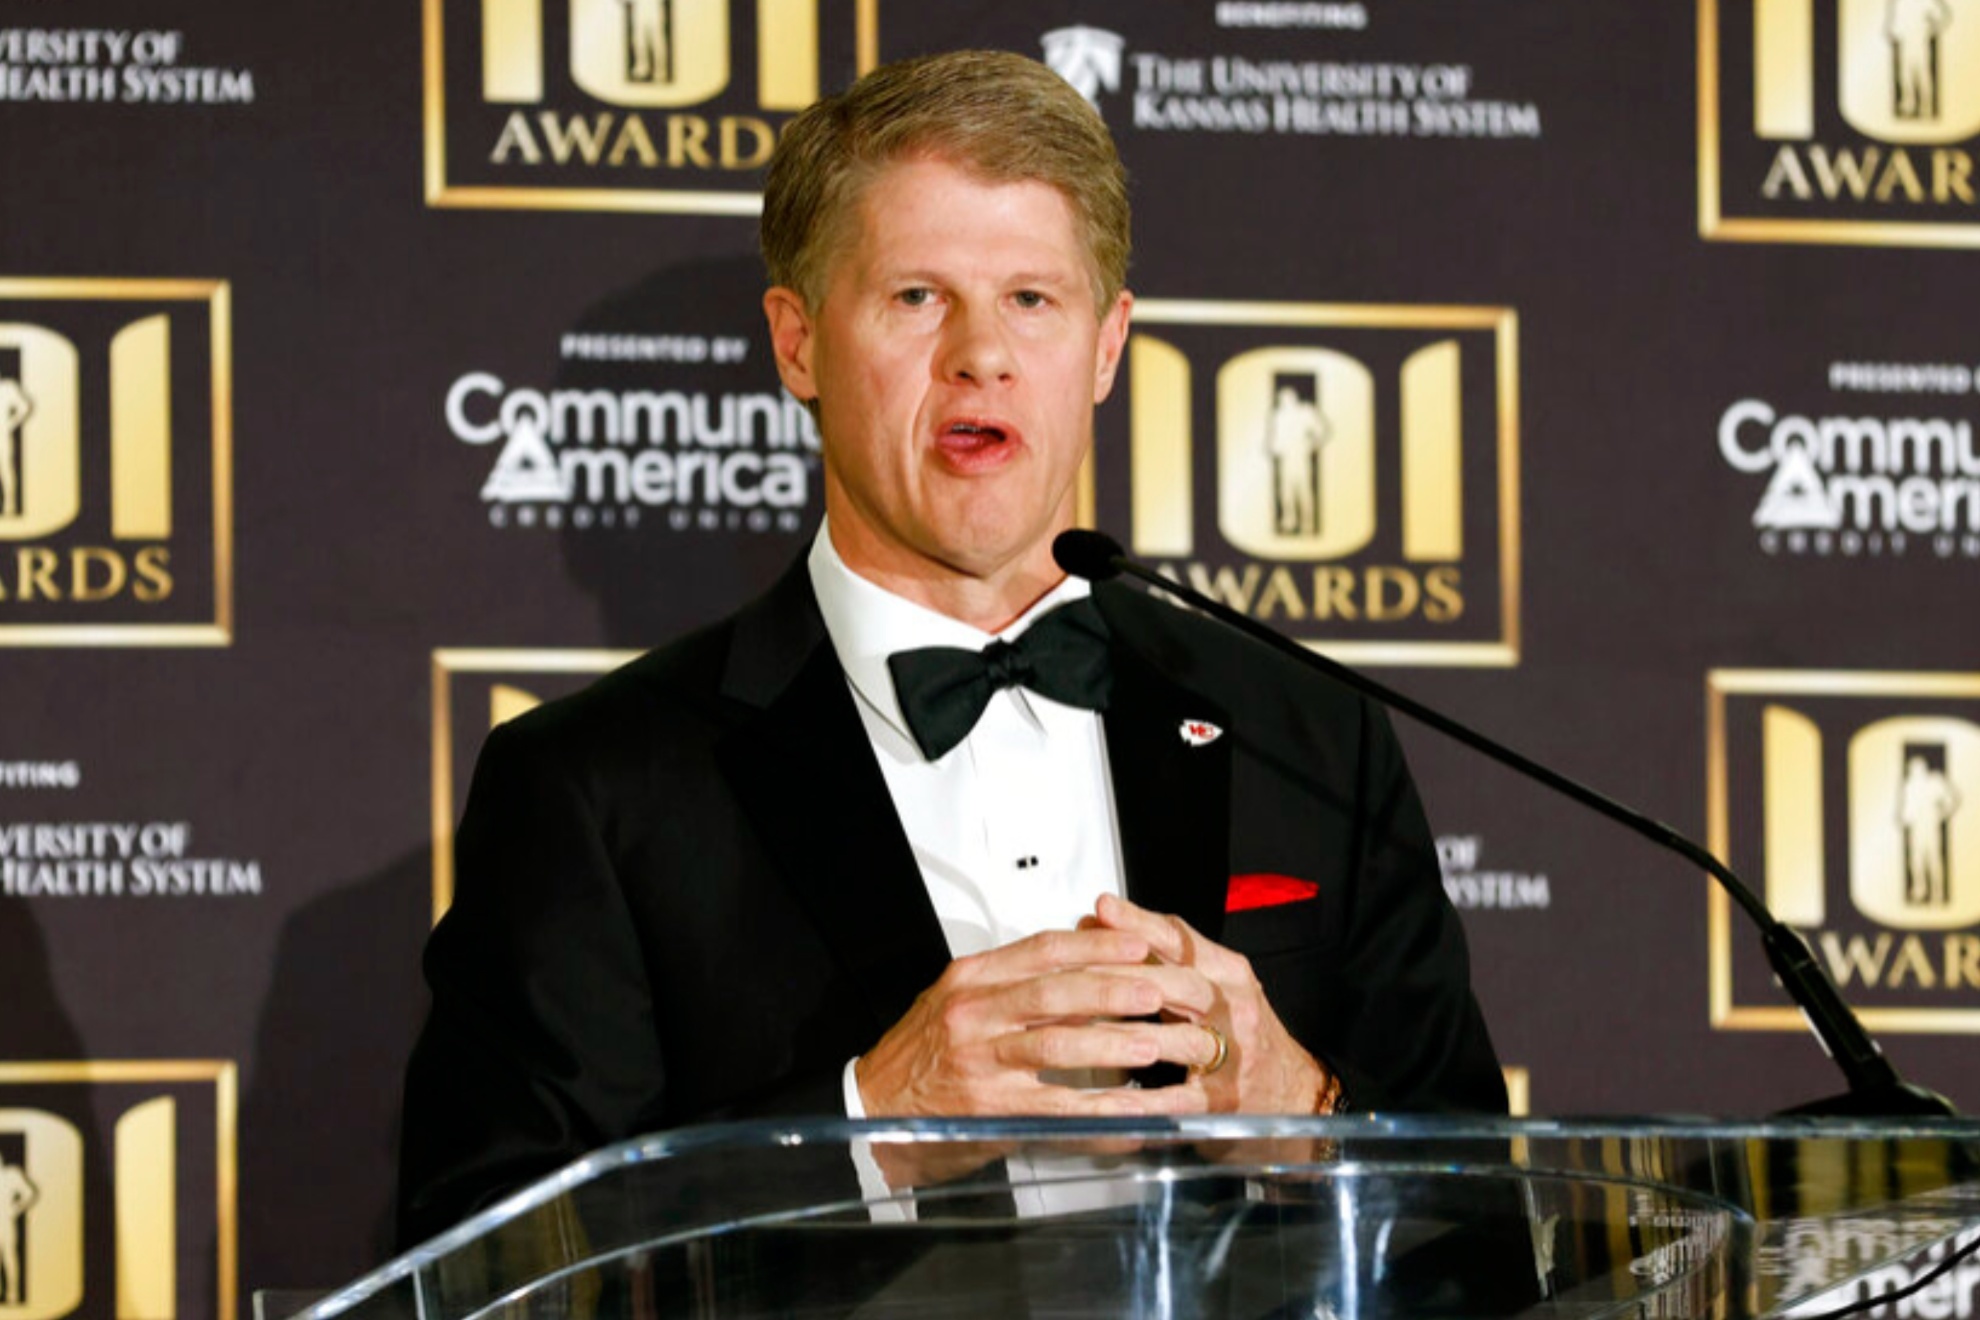 Clark Hunt is the primary-owner, chairman and CEO of the Kansas City Chiefs